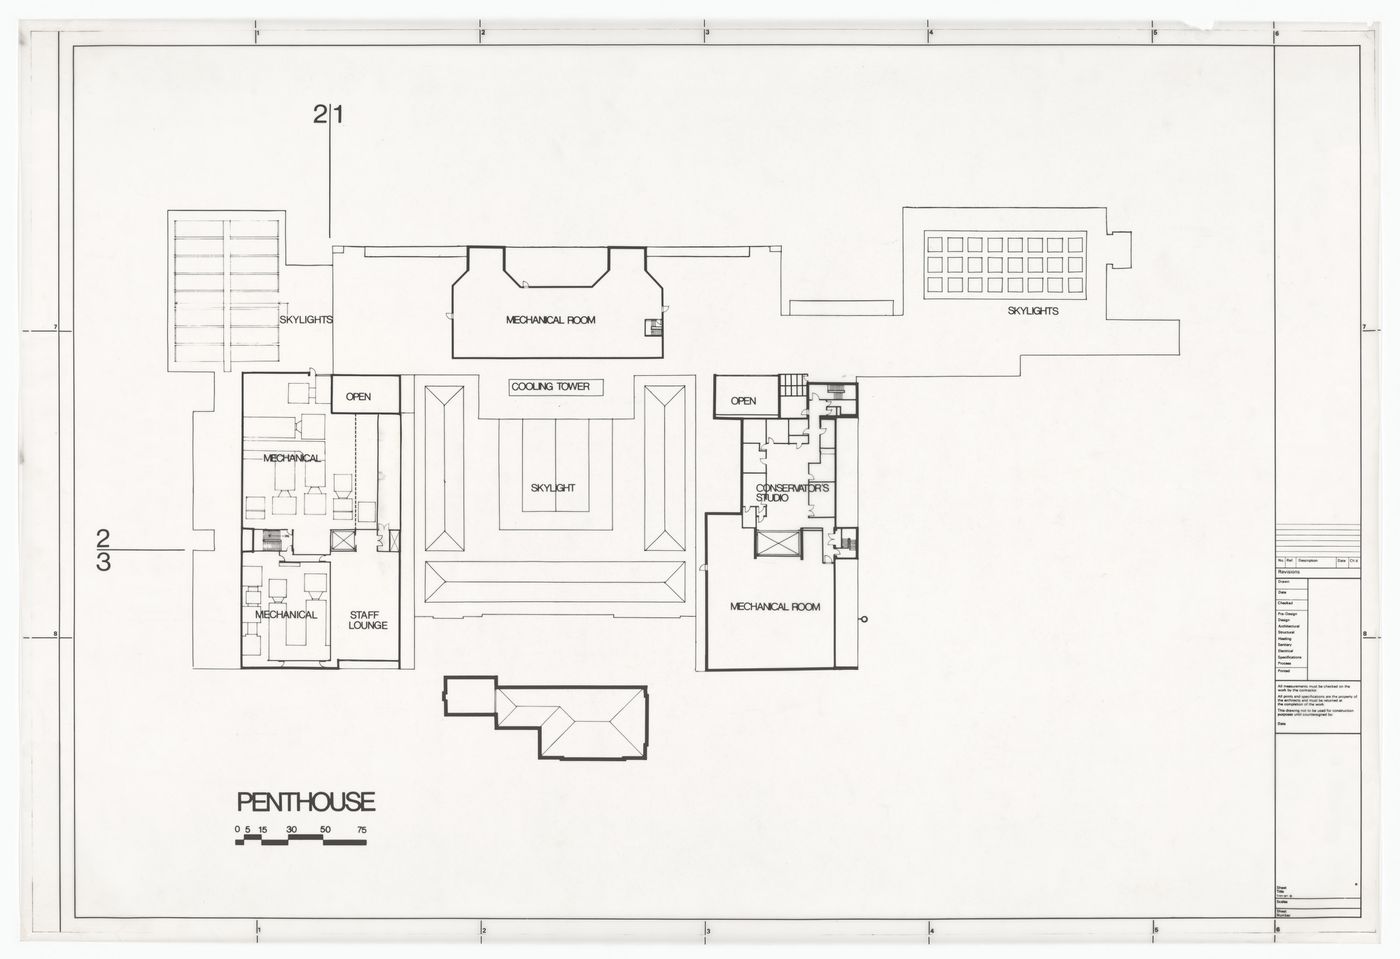 Penthouse plan for Art Gallery of Ontario, Stage II Expansion, Toronto